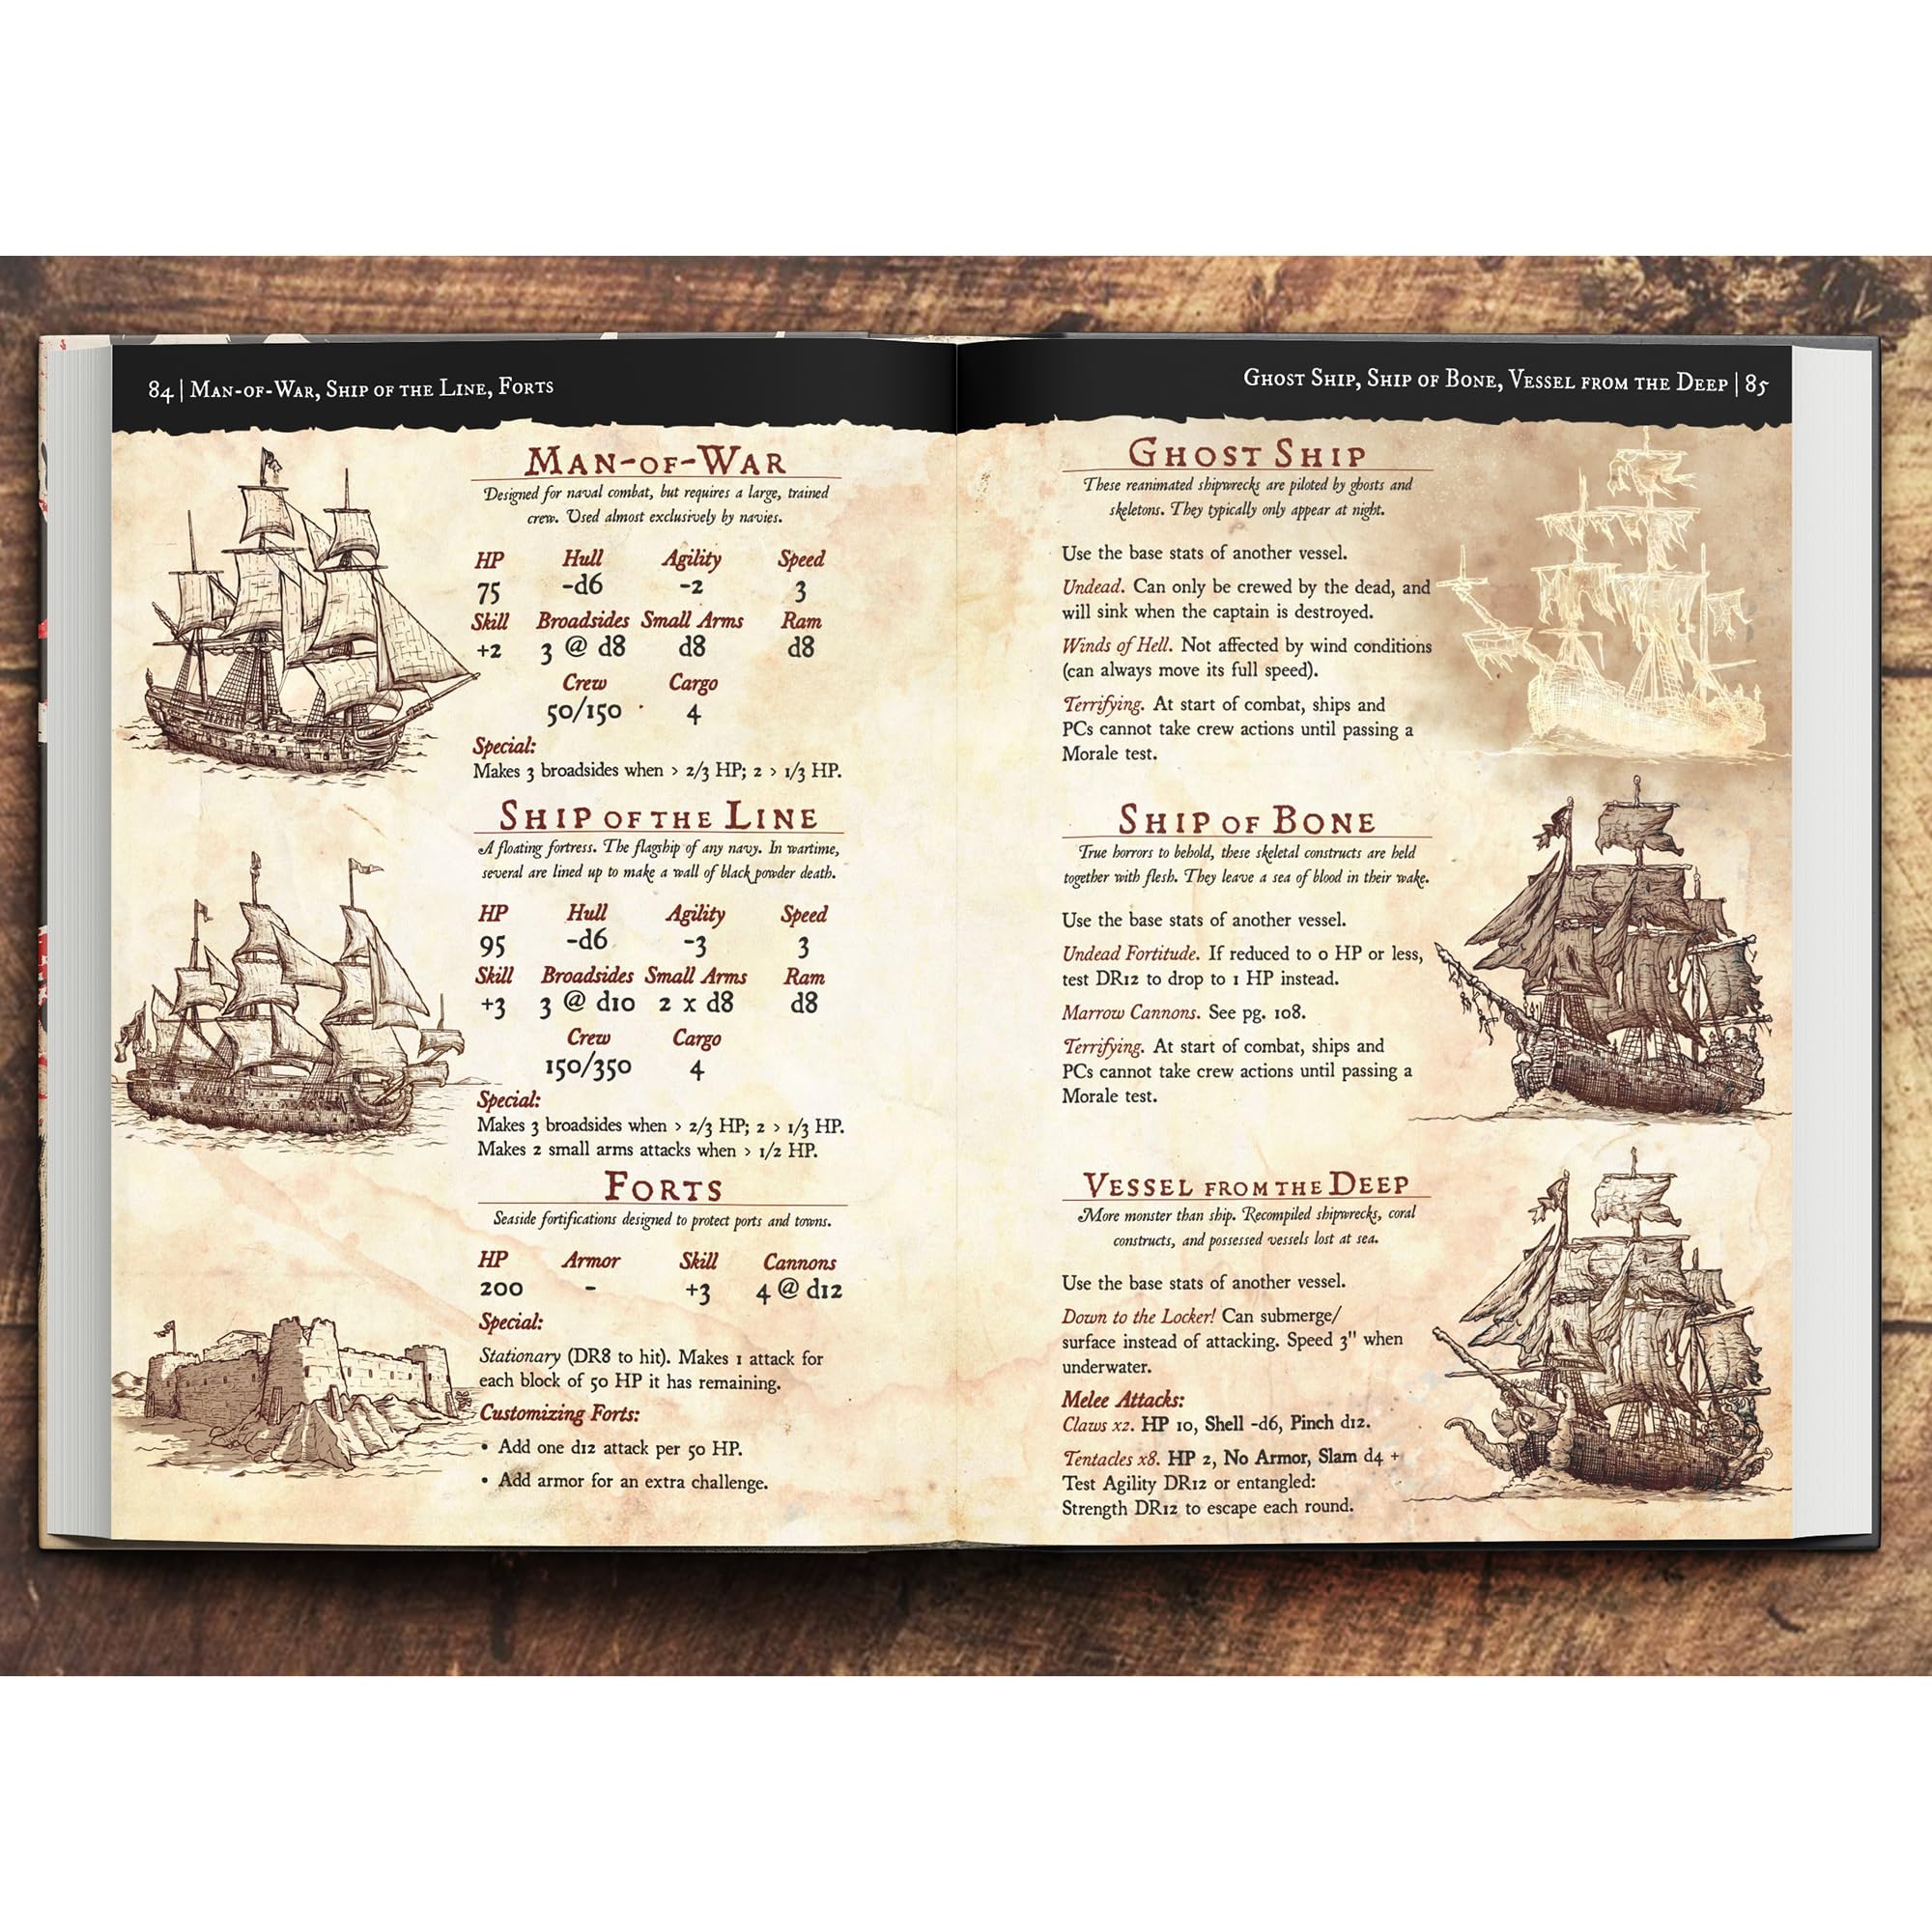 Free League Publishing: Pirate Borg Core Rulebook - (2nd Printing) - Hardcover RPG Book, Naval Themed, Compatible with Mork Borg, d20 Roleplaying Game